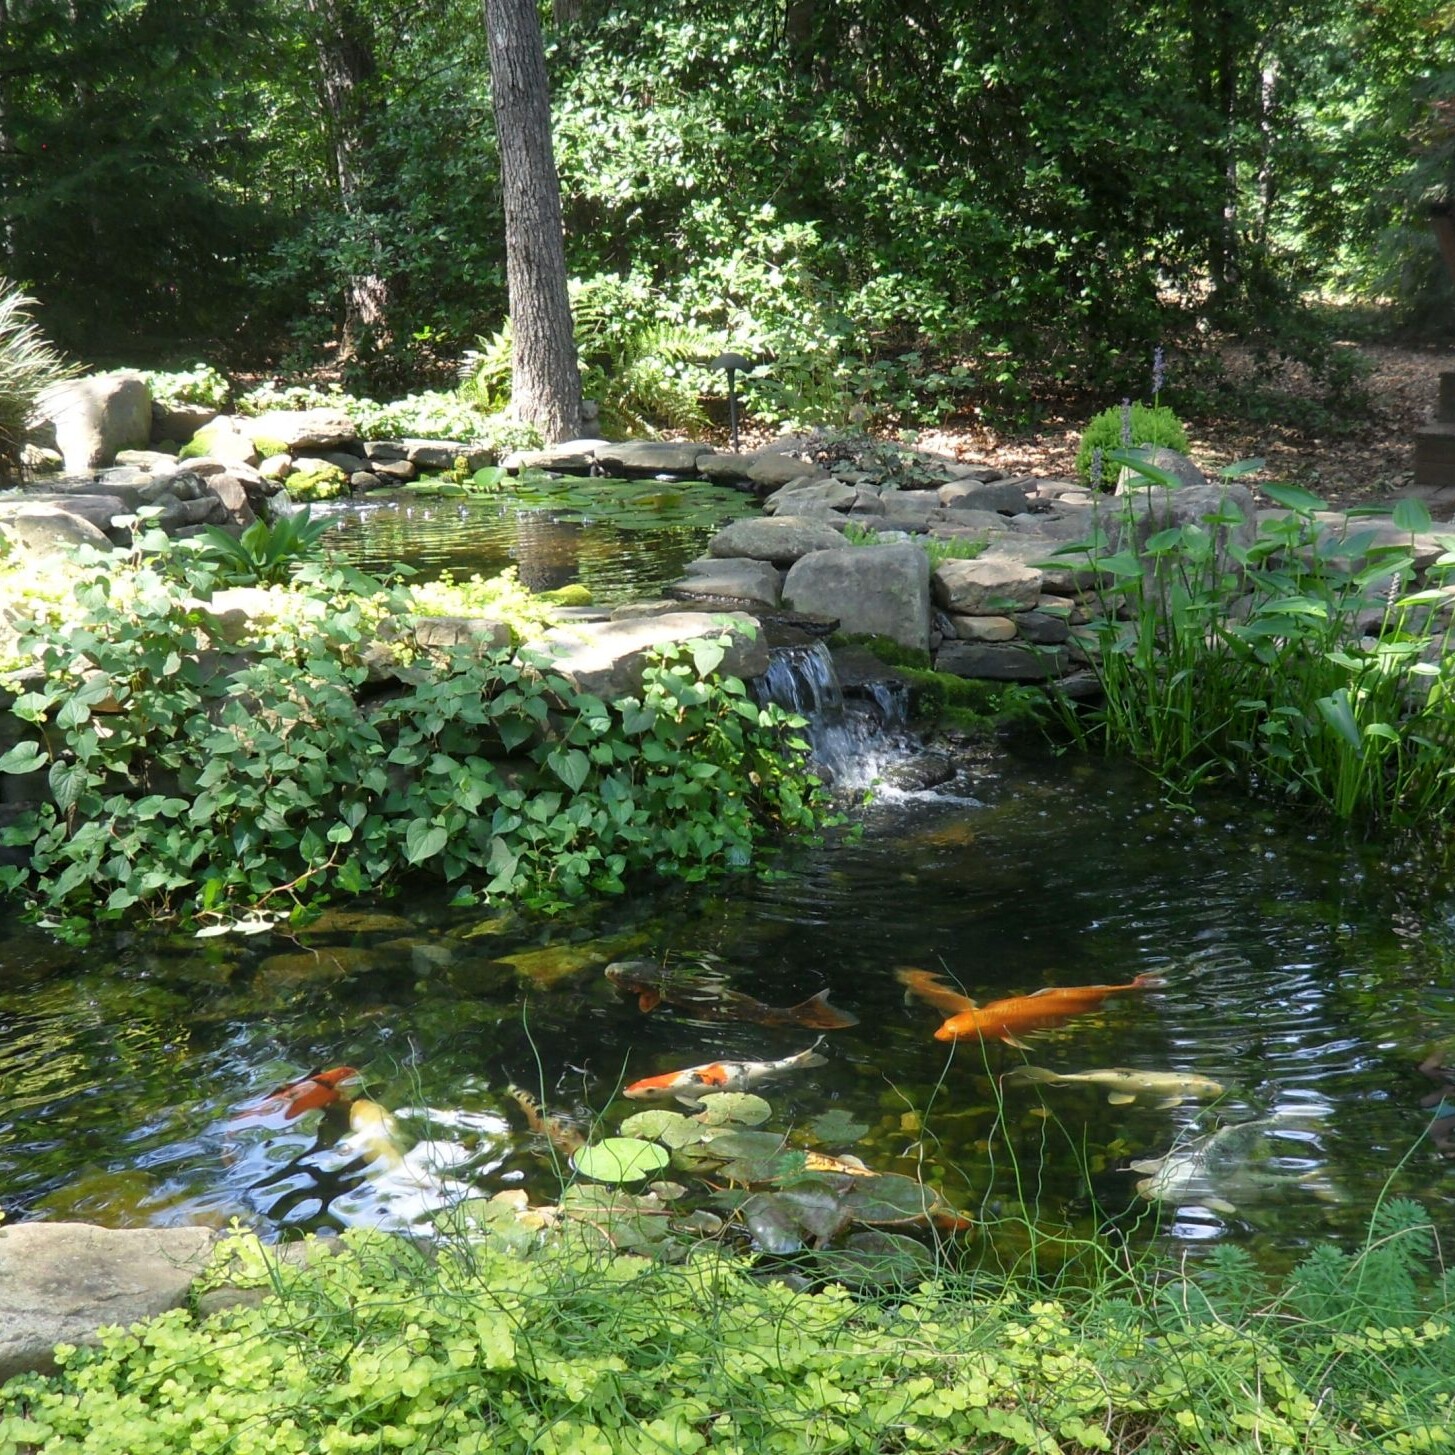 A pond with many different fish in it